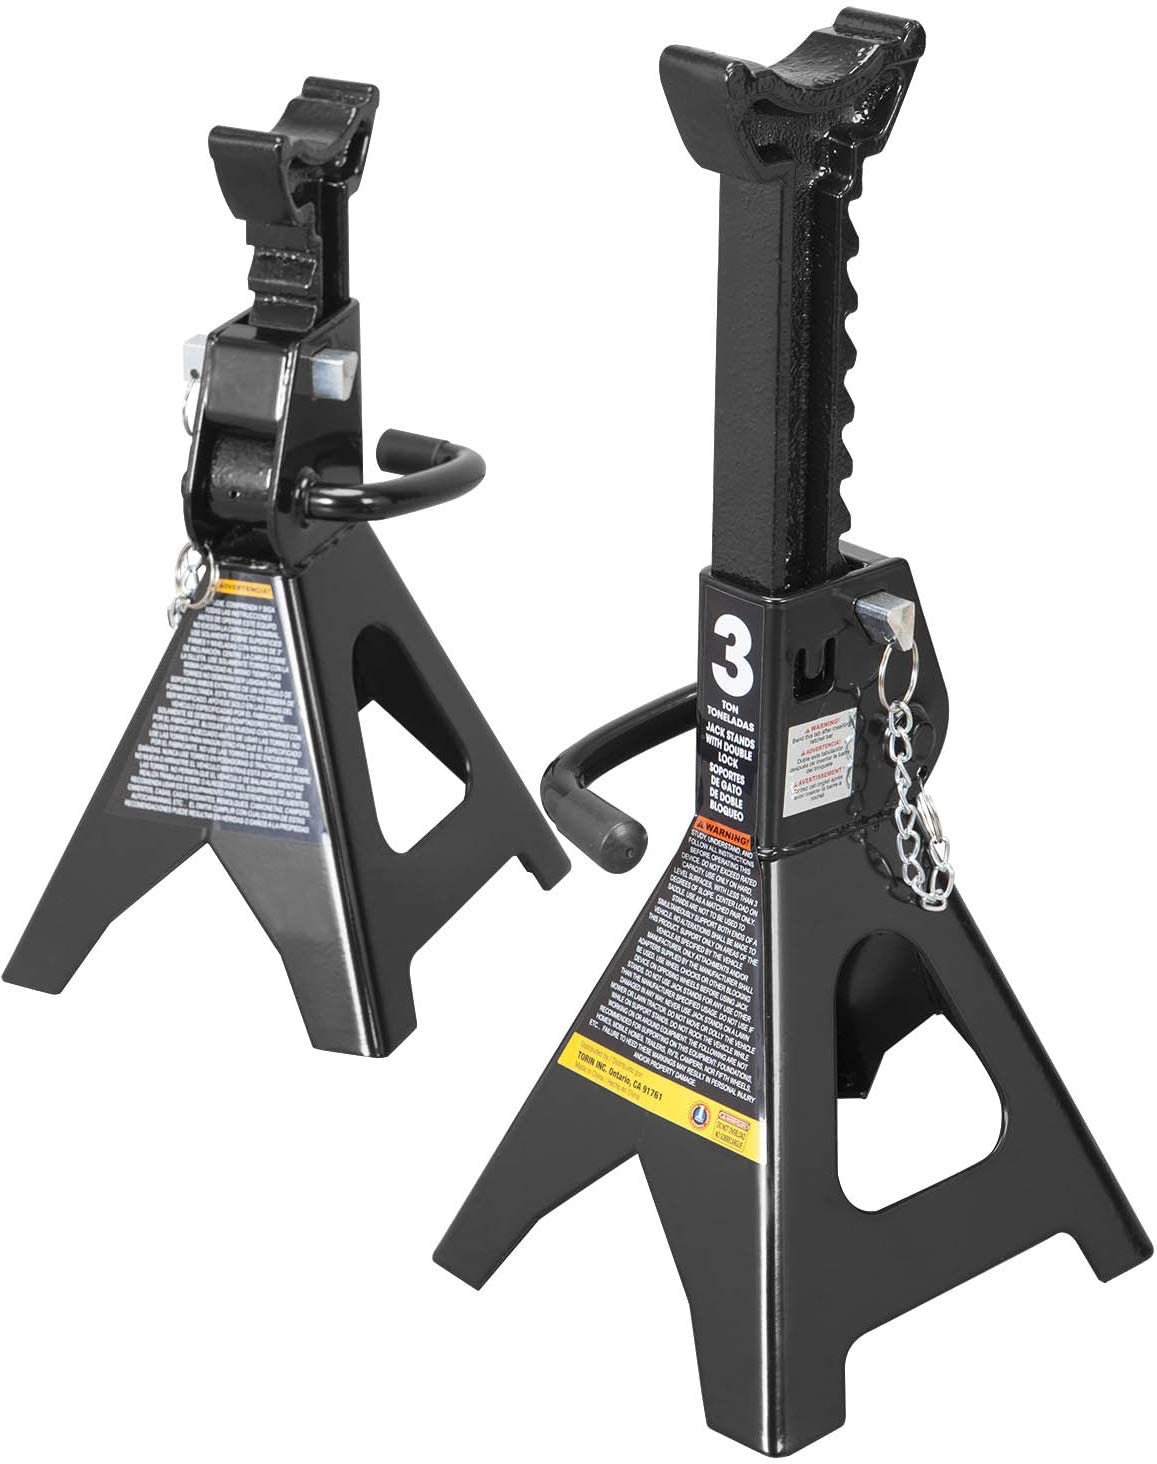 Torin DT43002AB Steel Jack Stands: Double Locking, 3 Ton (6,000 lb) Capacity $24.33 + Free S/H on $35+ @ Walmart